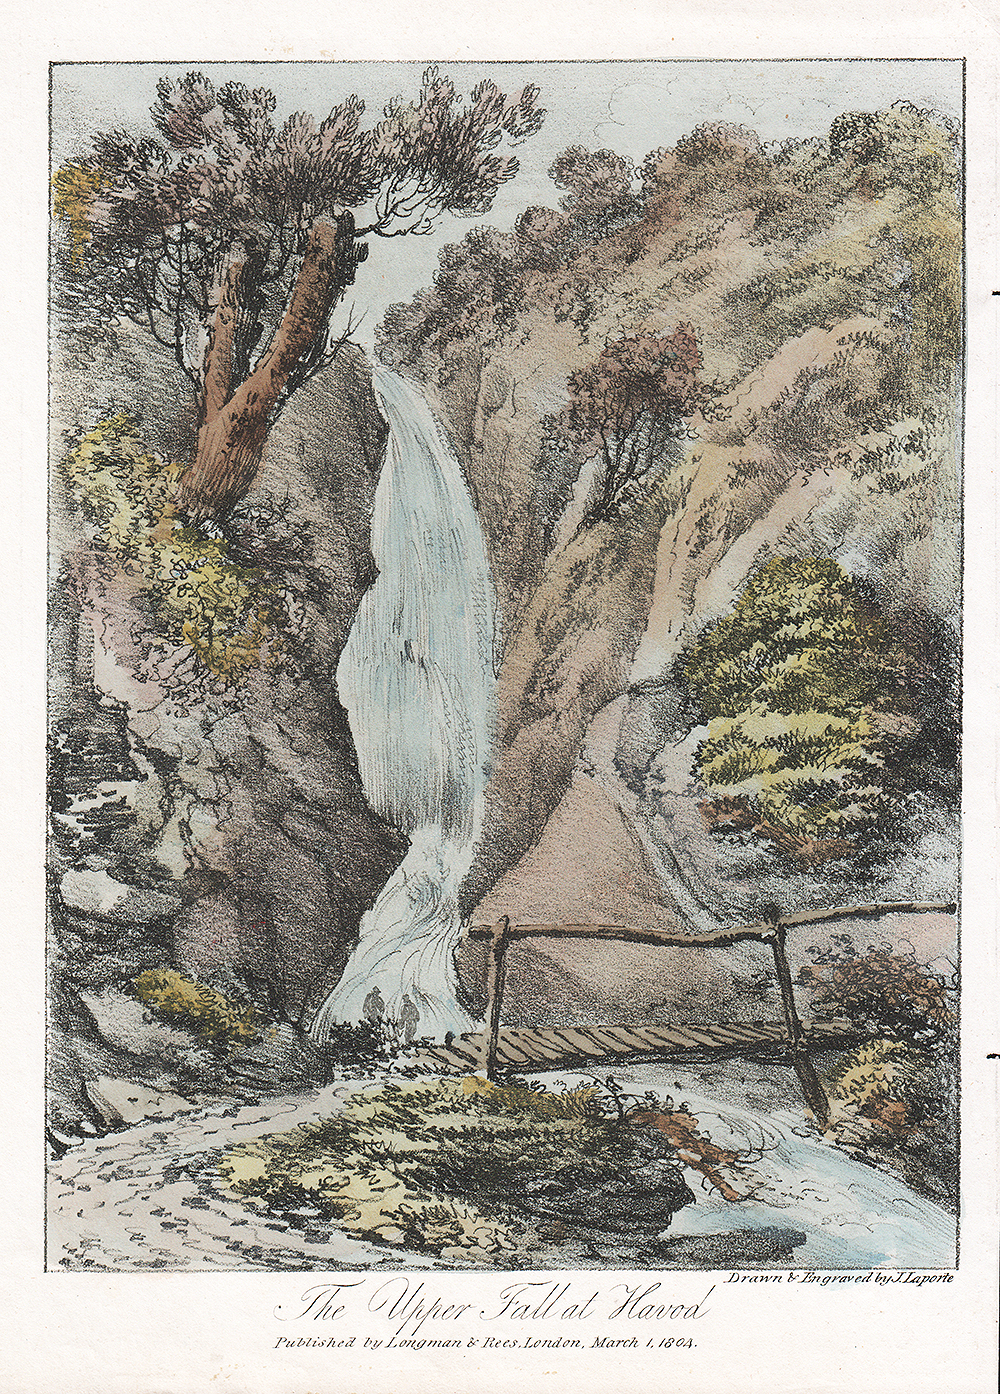 The Upper Fall at Havod